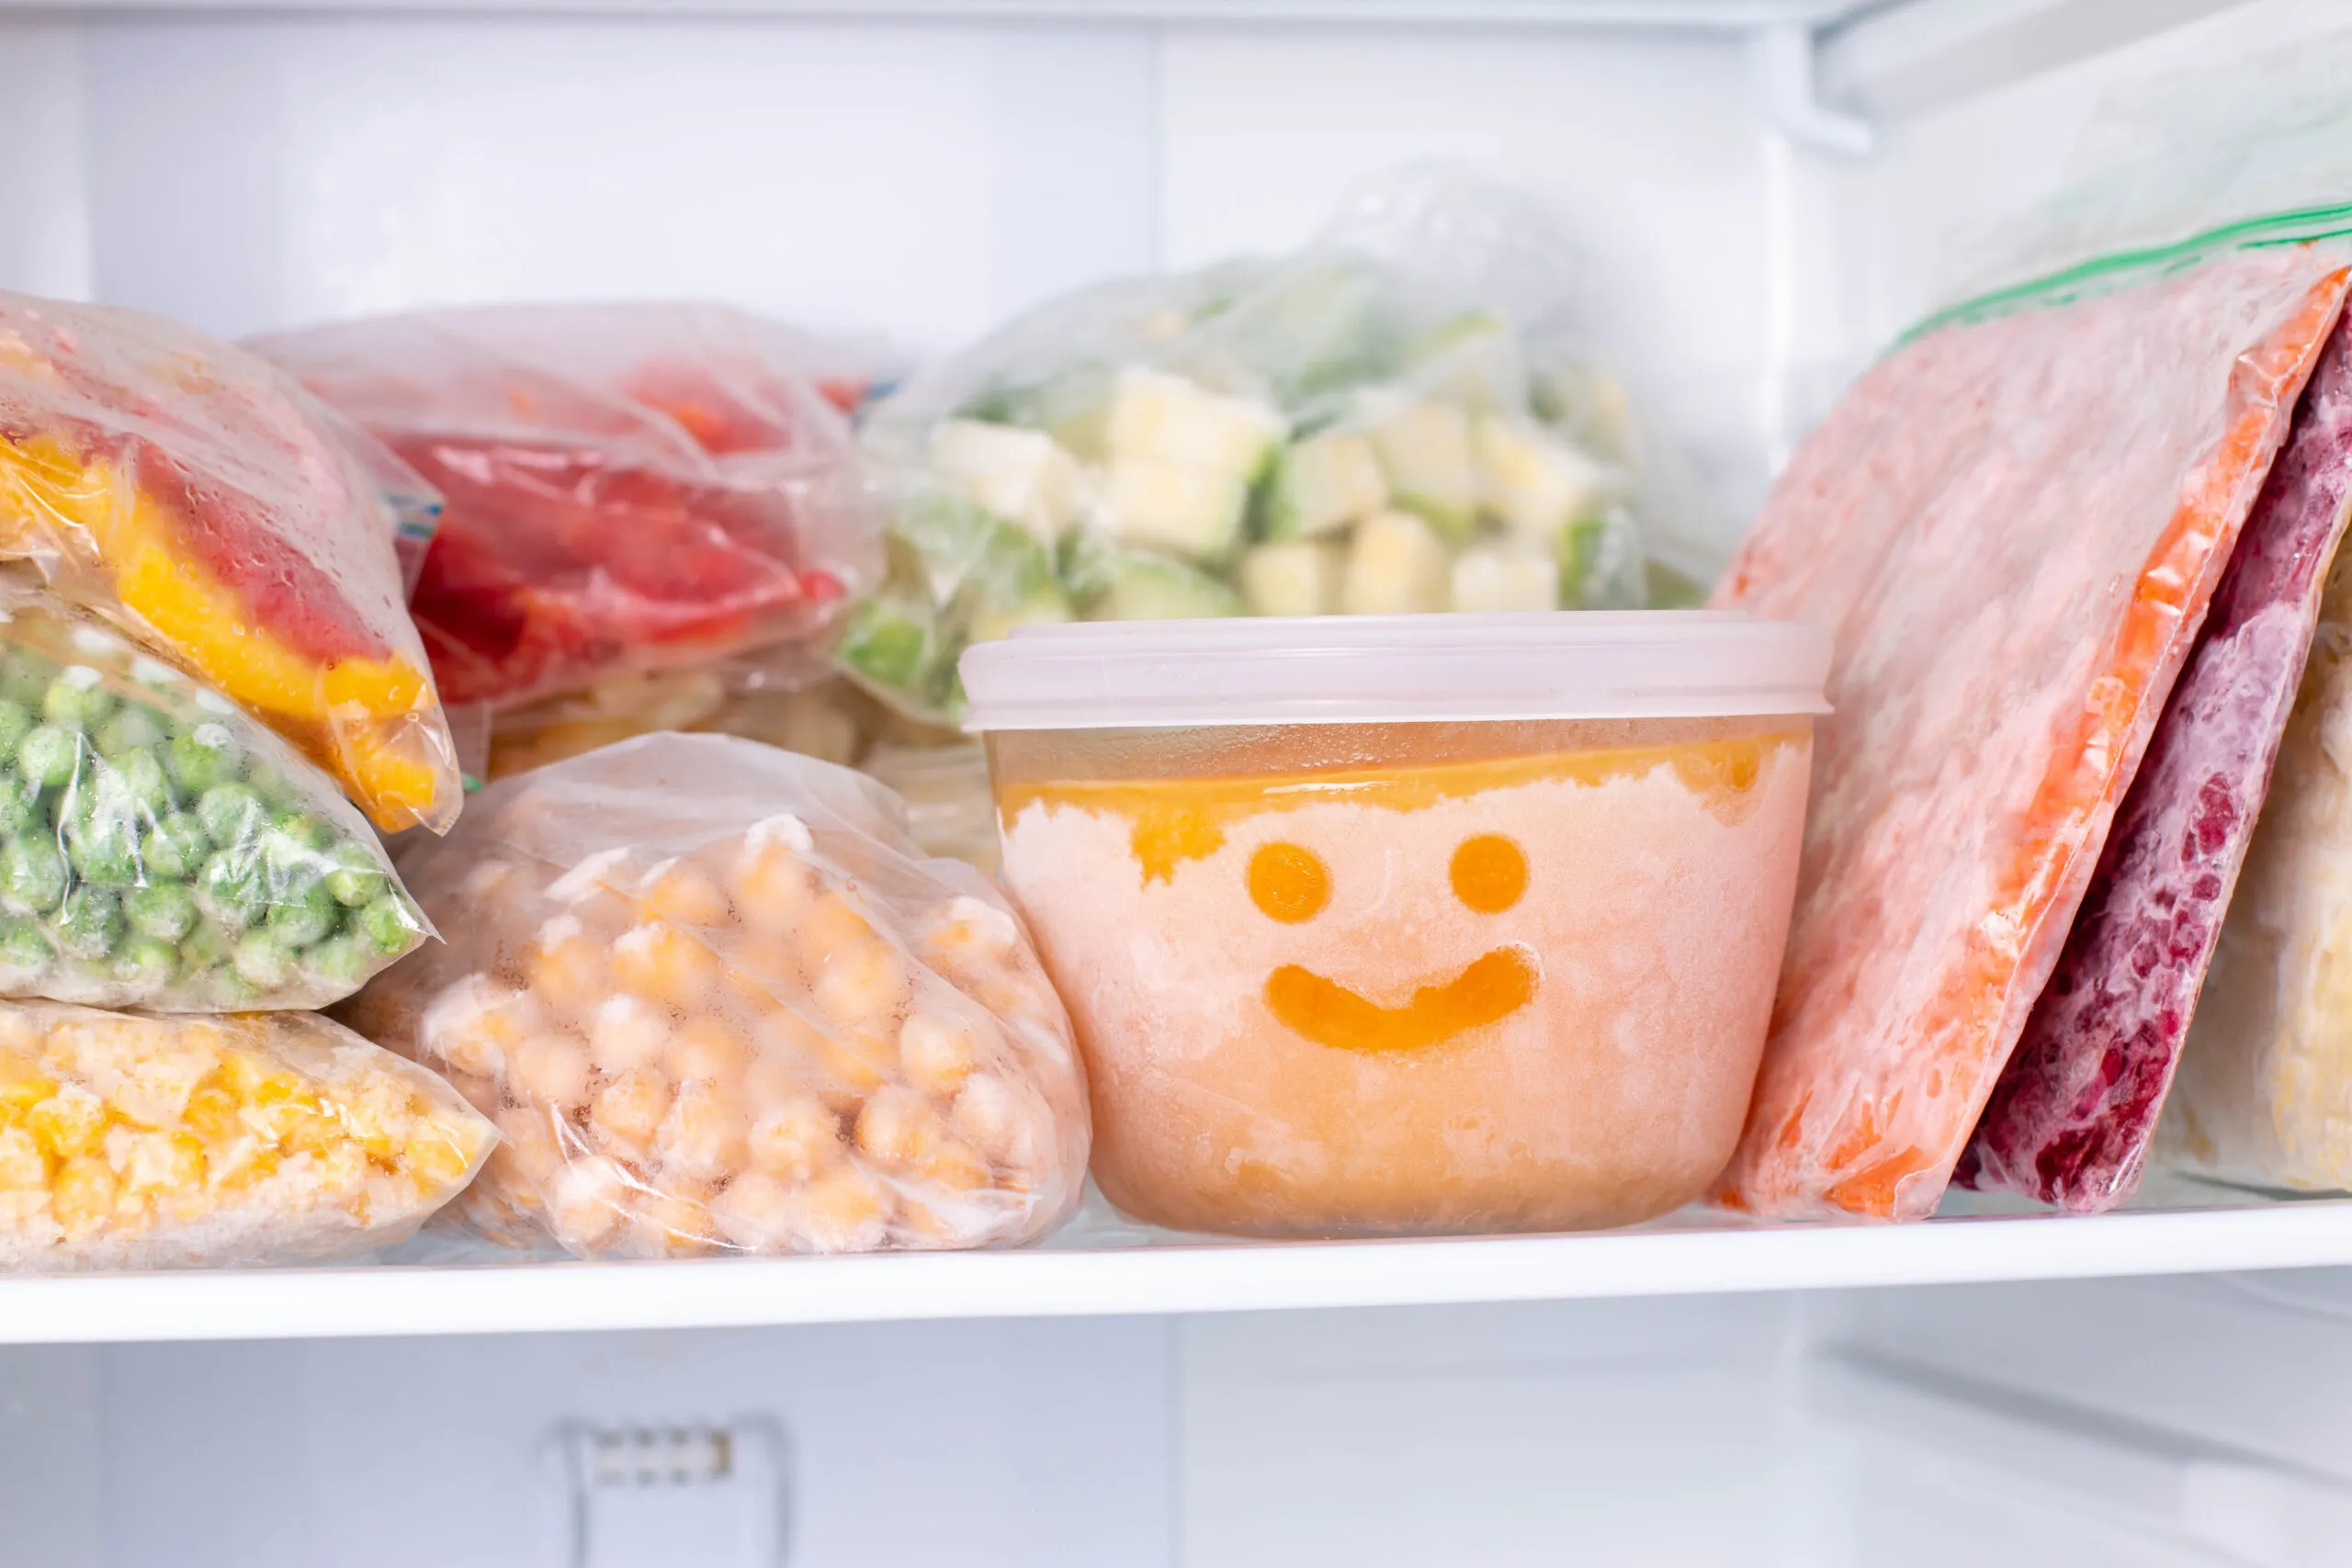 Can you eat frozen food past the expiration date and what are the risks? -  AS USA